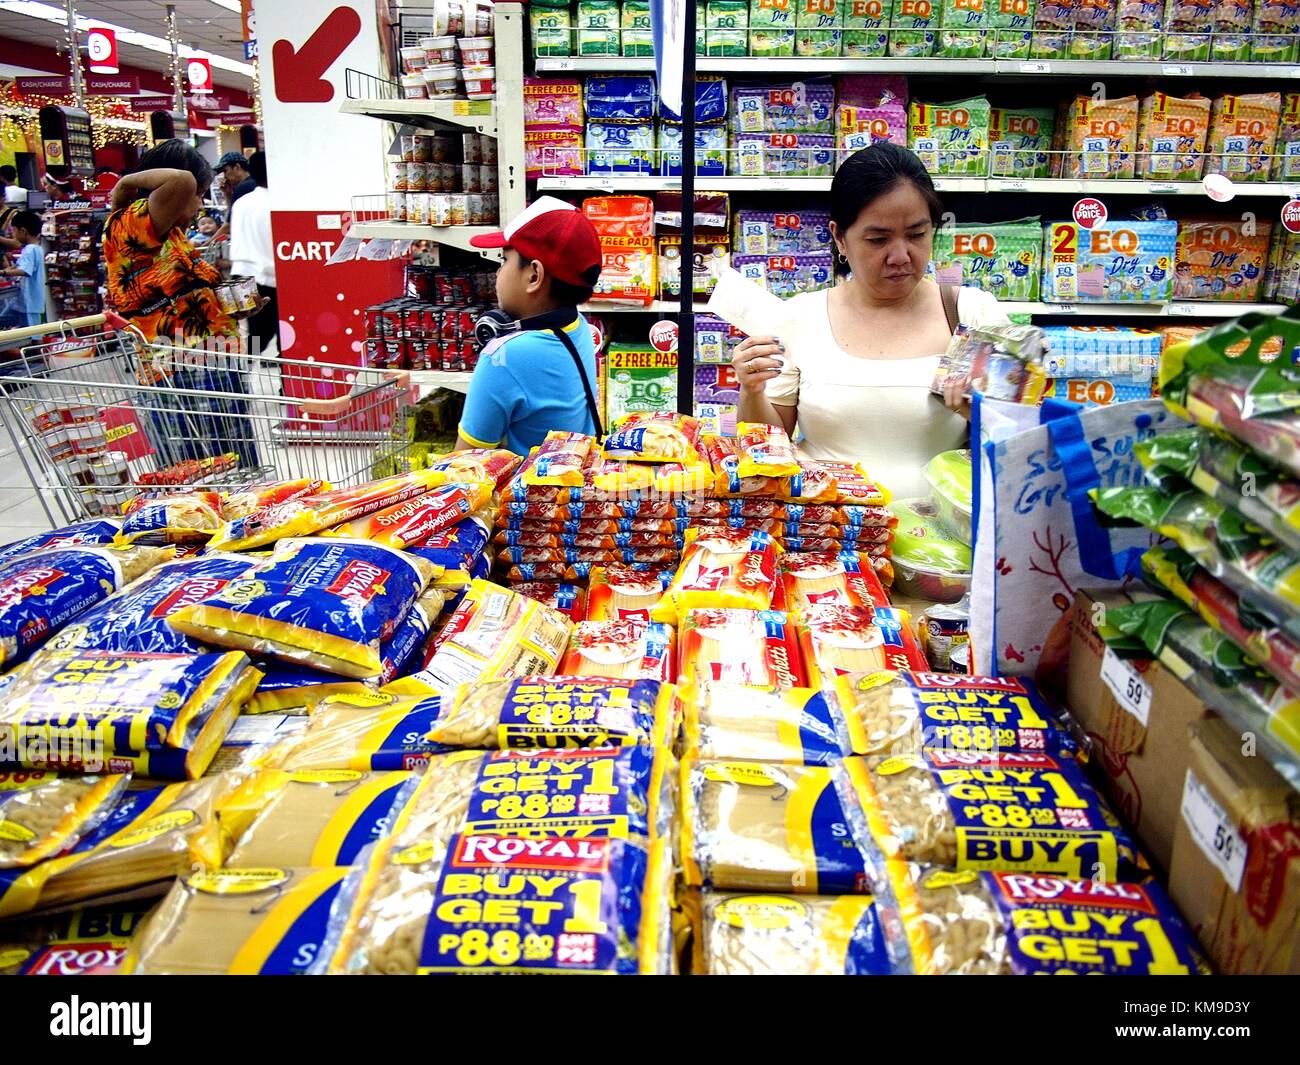 Antipolo City Philippines December 2 2017 A Lady Checks Out A Product From A Stack Of